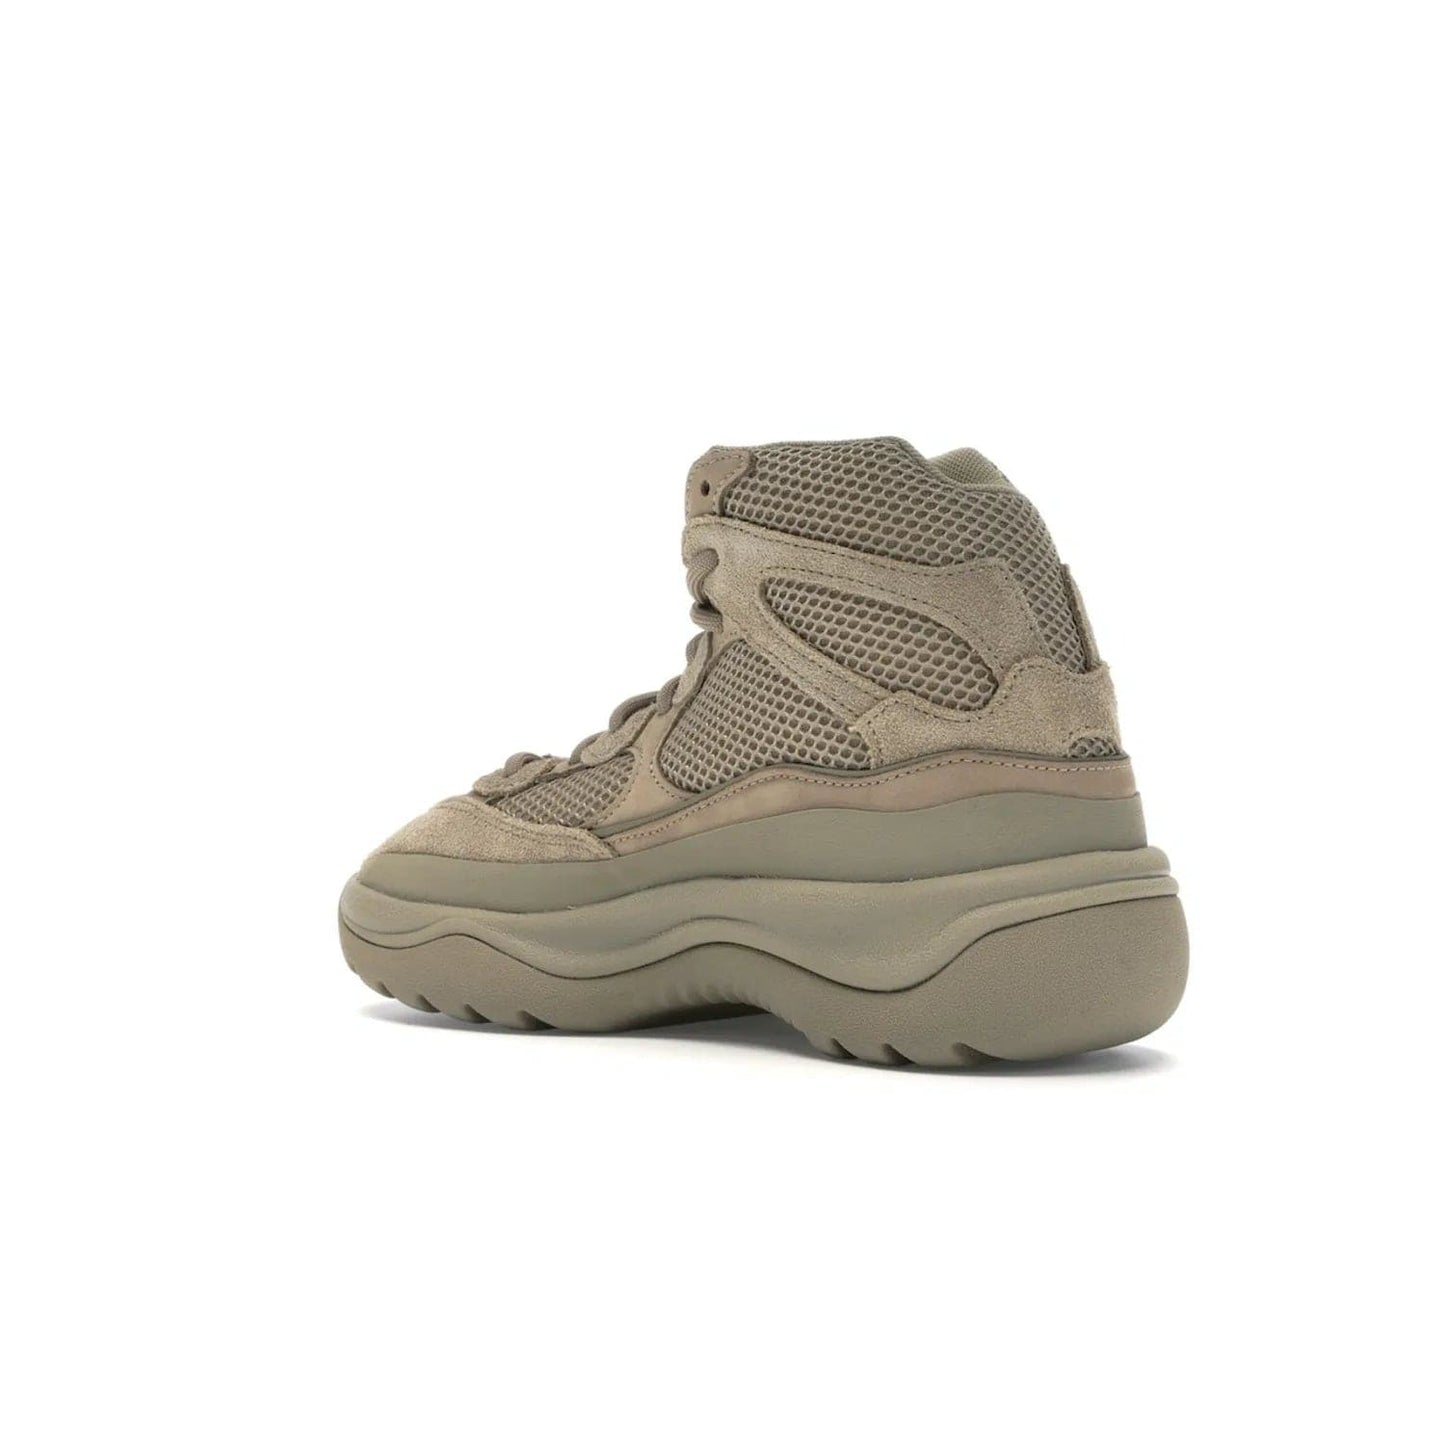 adidas Yeezy Desert Boot Rock - Image 23 - Only at www.BallersClubKickz.com - #
This season, make a fashion statement with the adidas Yeezy Desert Boot Rock. Nubuck and suede upper offers tonal style while the grooved sole provides traction and stability. Get yours in April 2019.